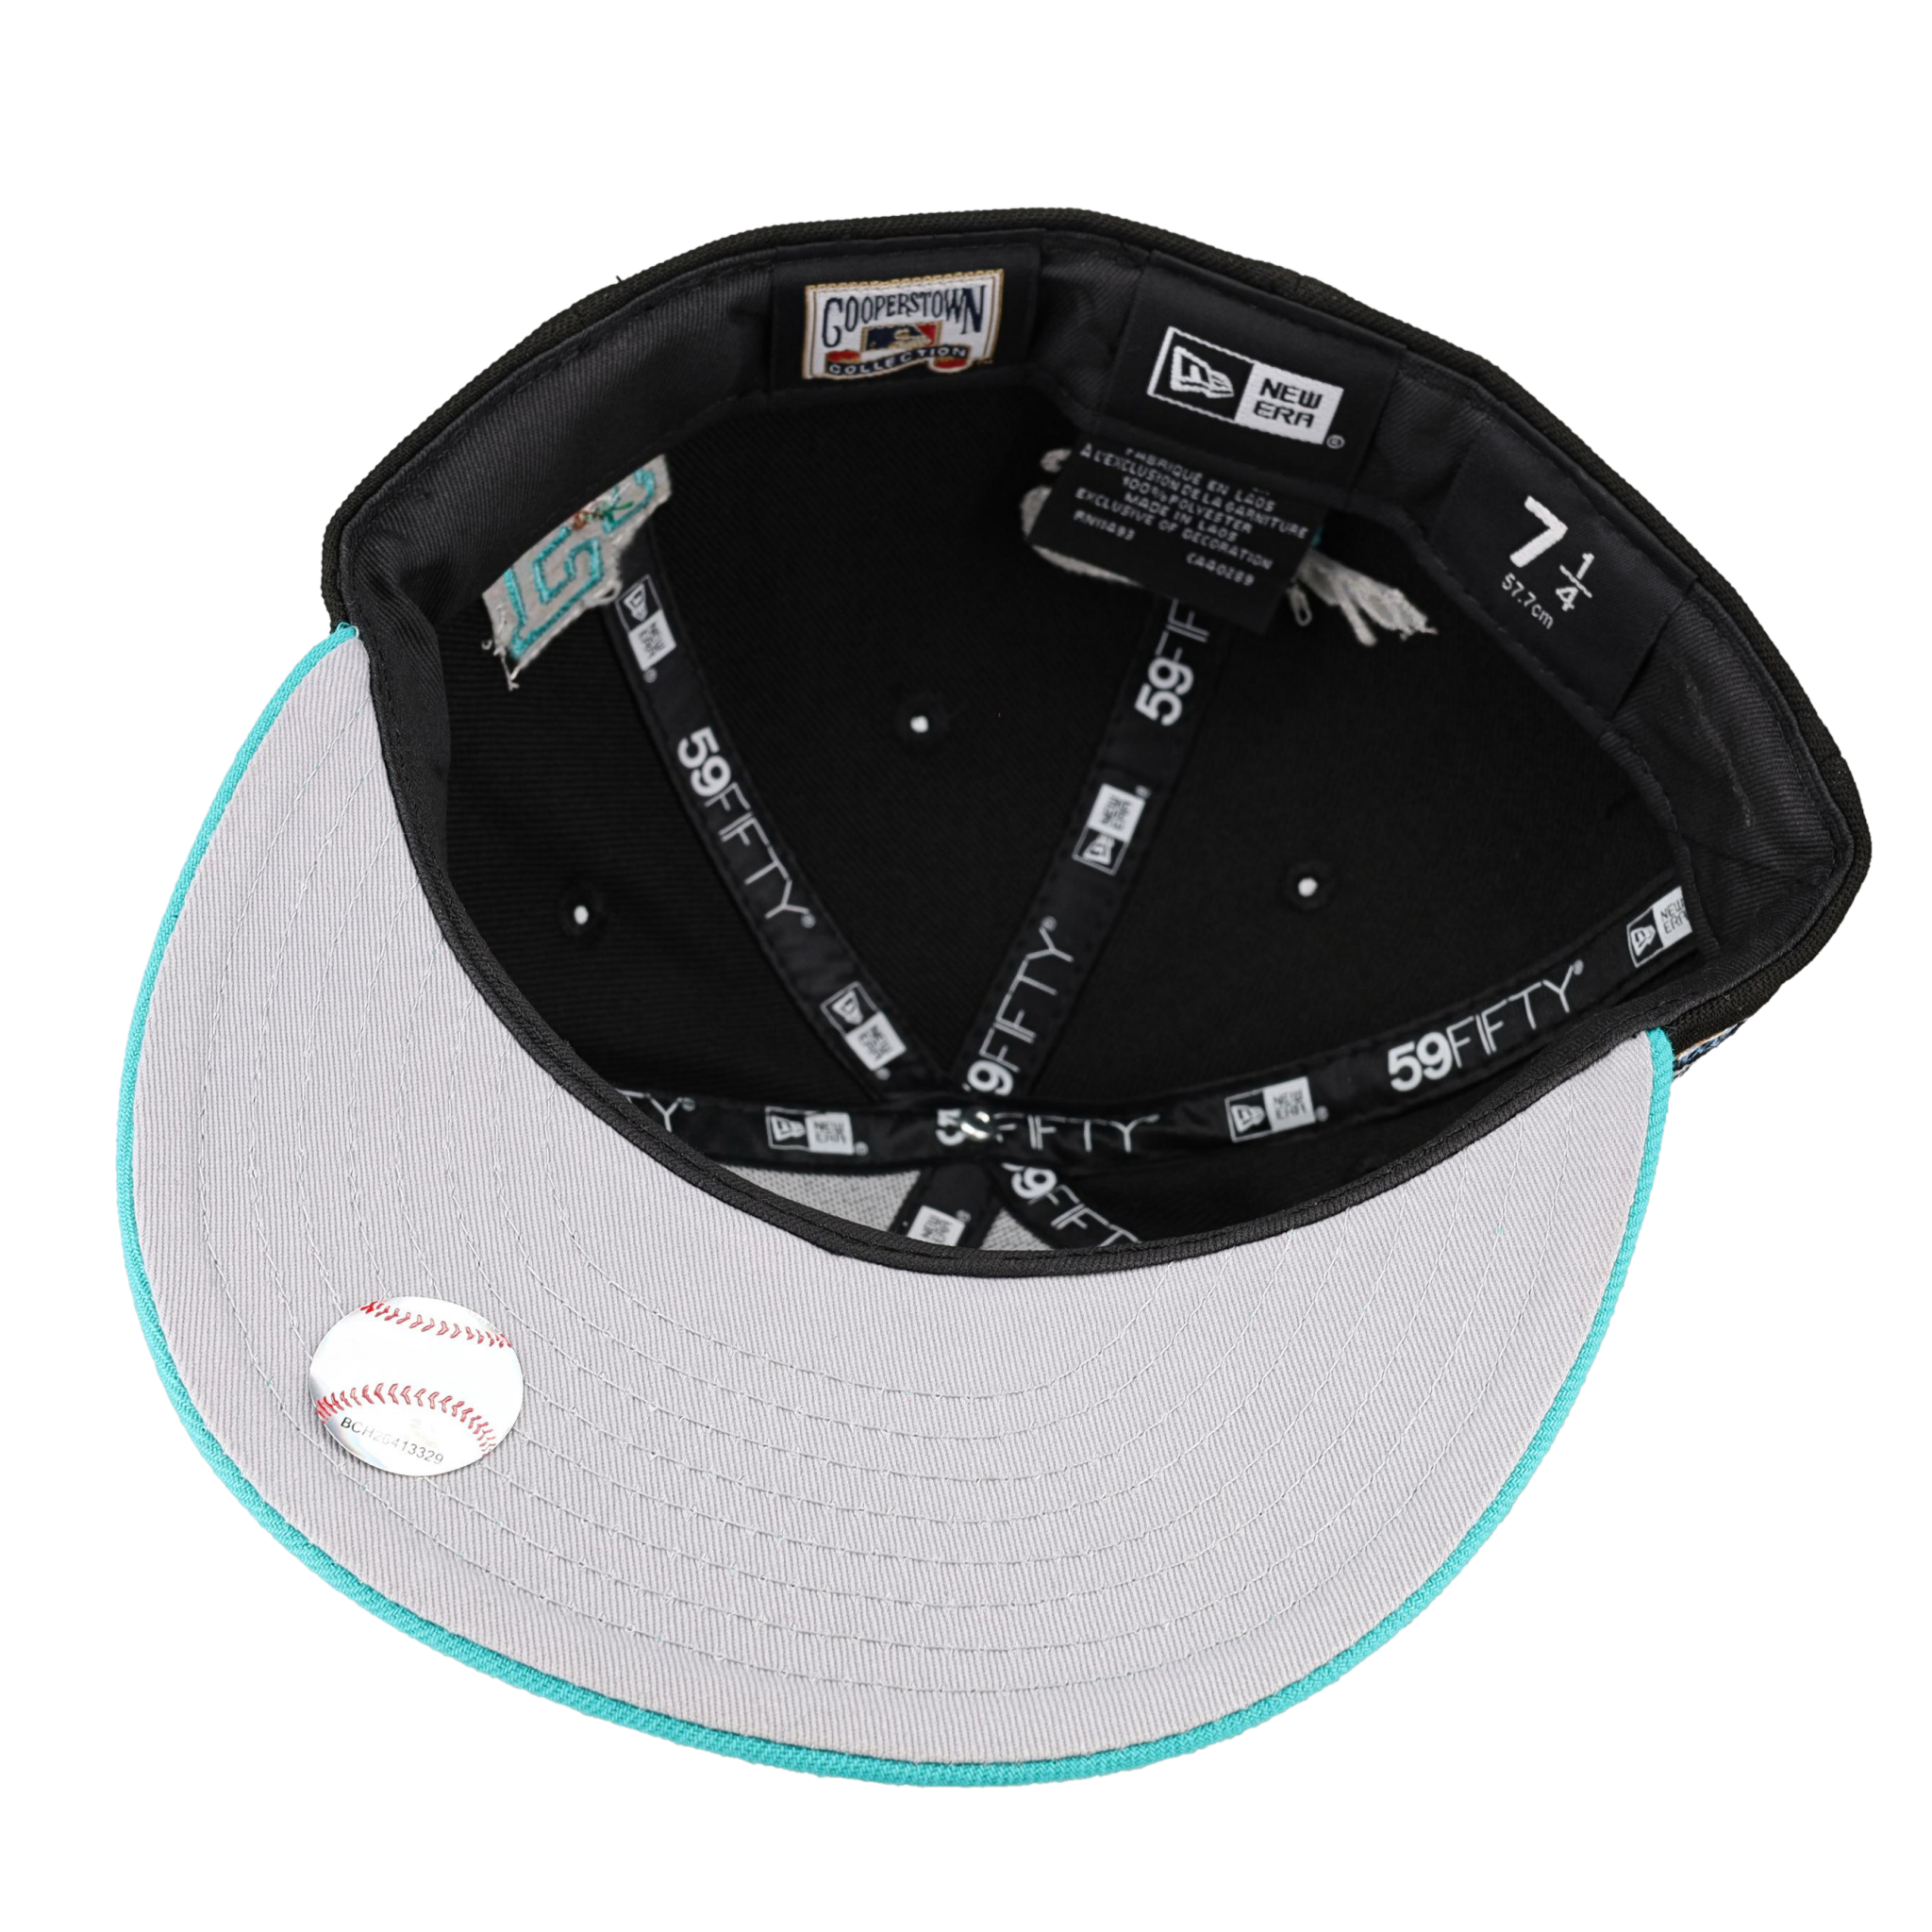 Florida Marlins Letterman Collection 59Fifty Fitted Hat